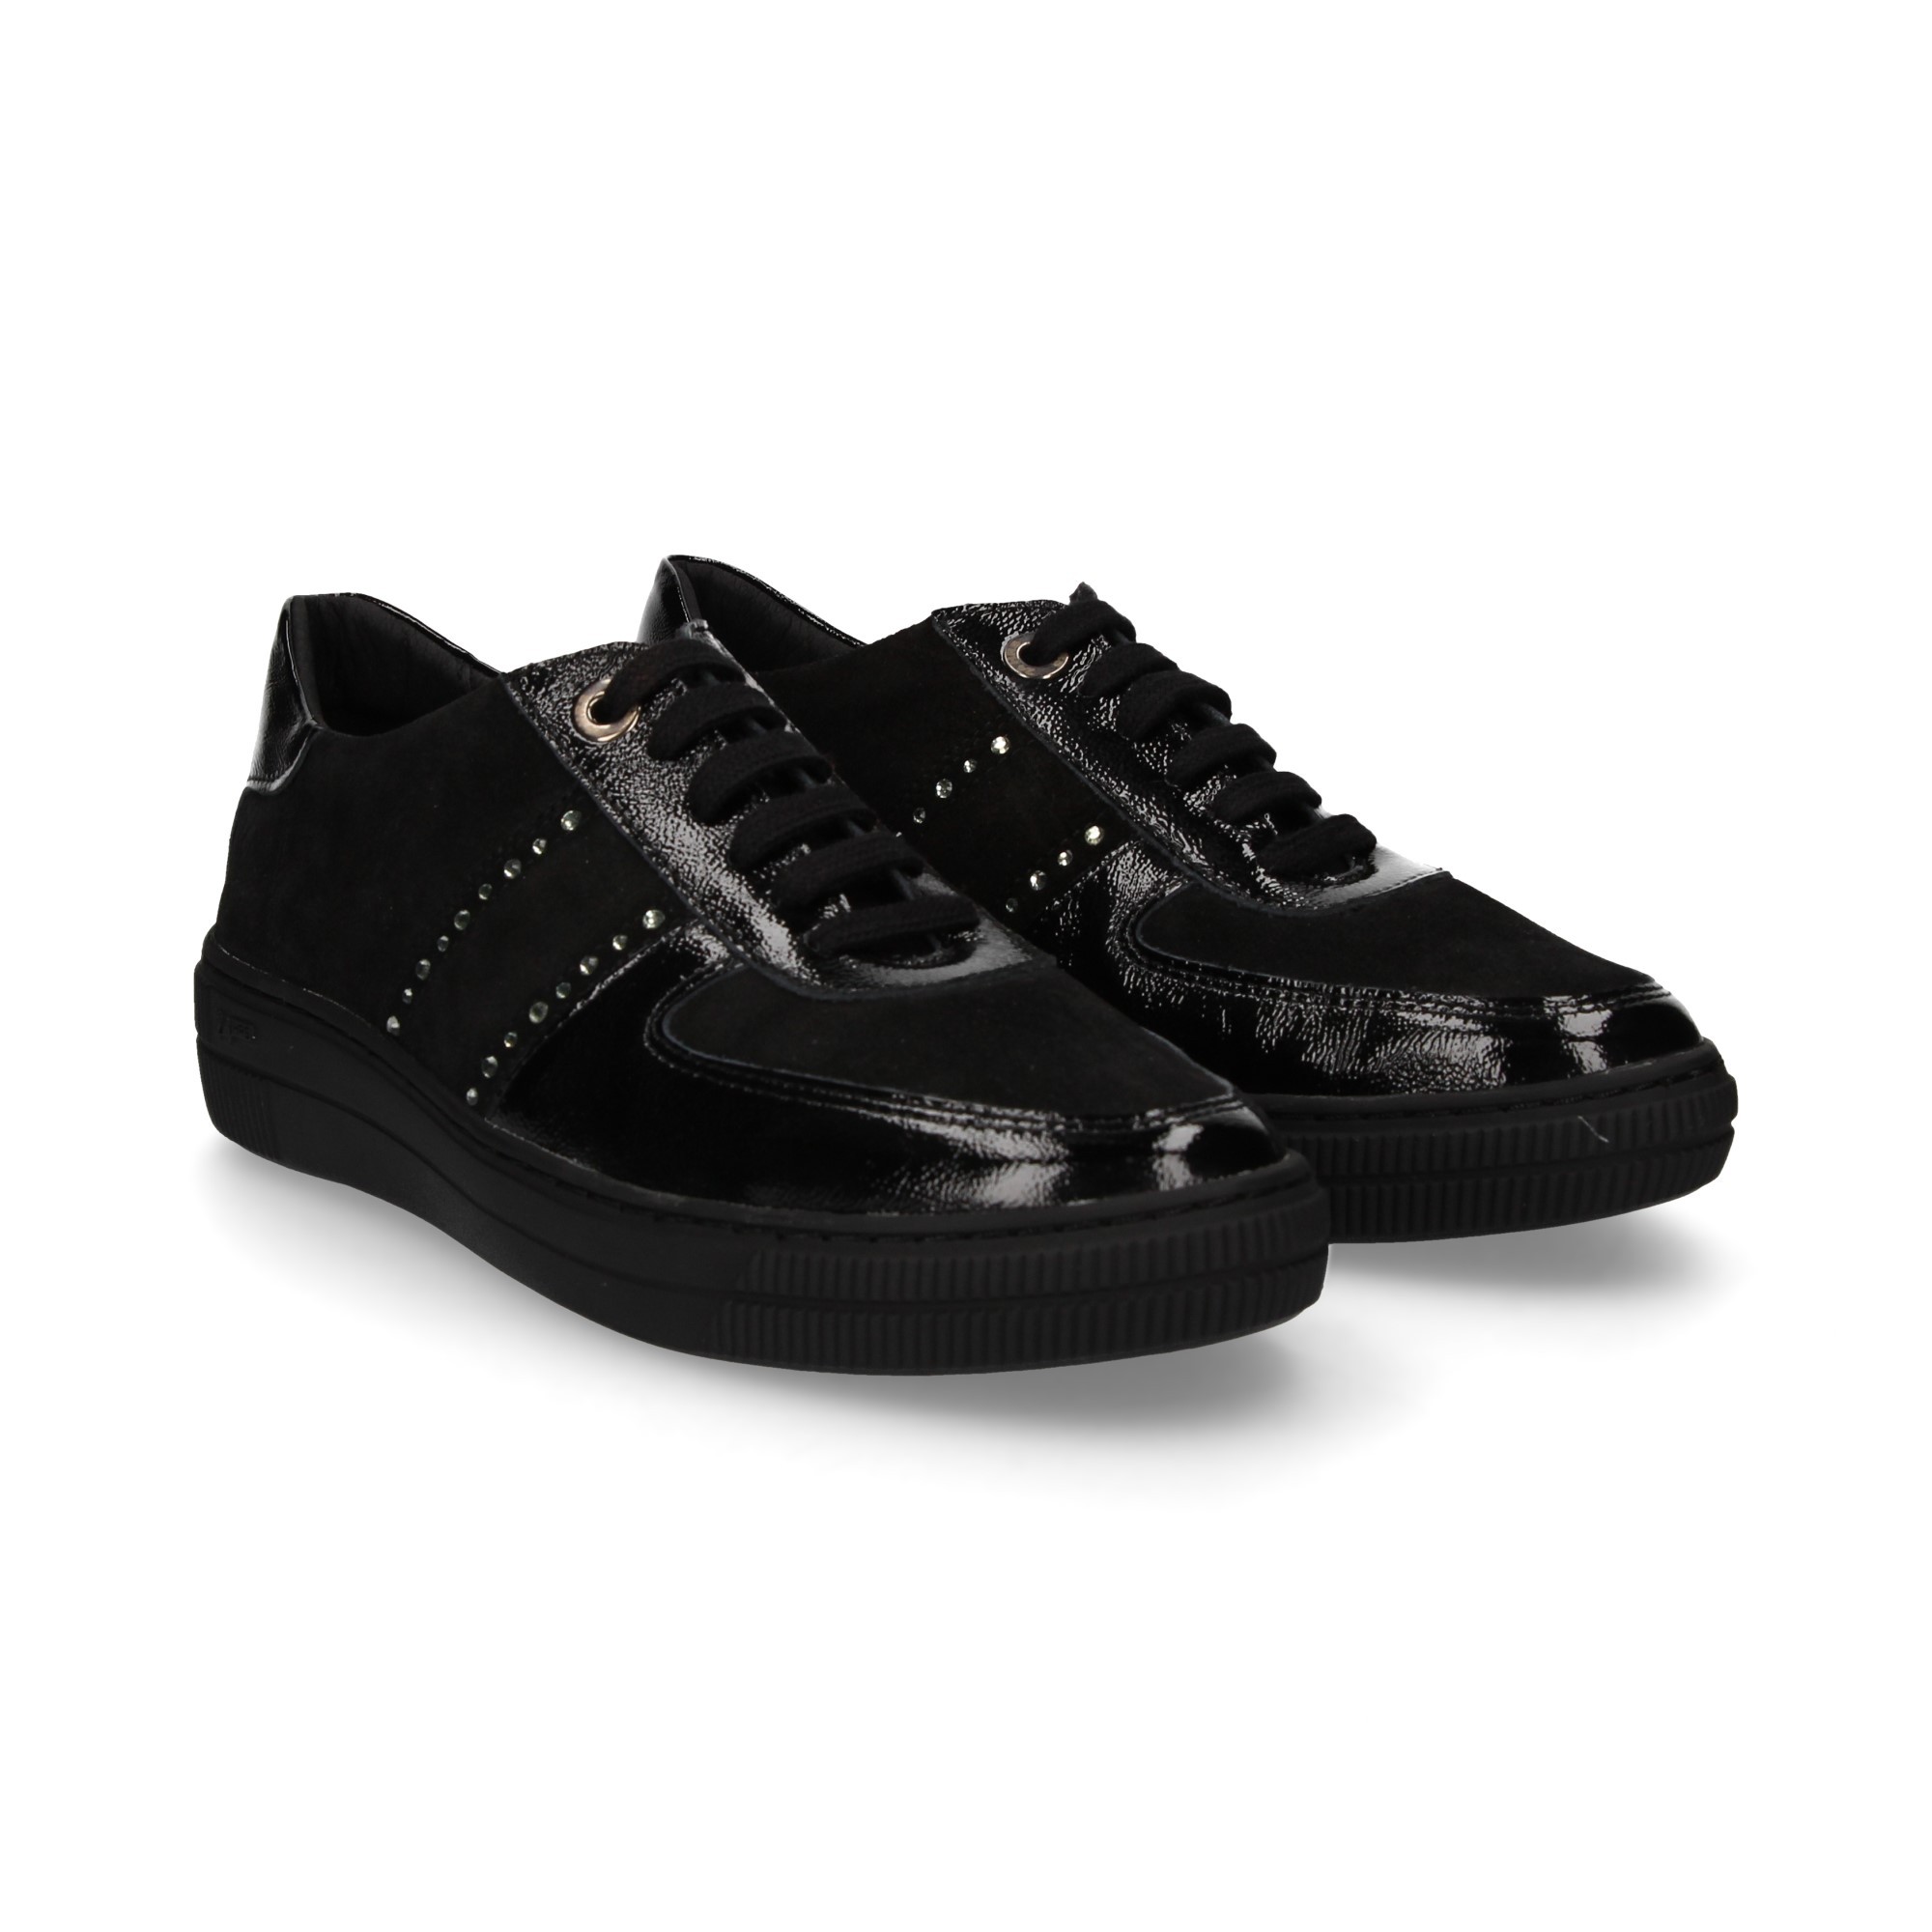 sporty-patent-leather-black-strass-front